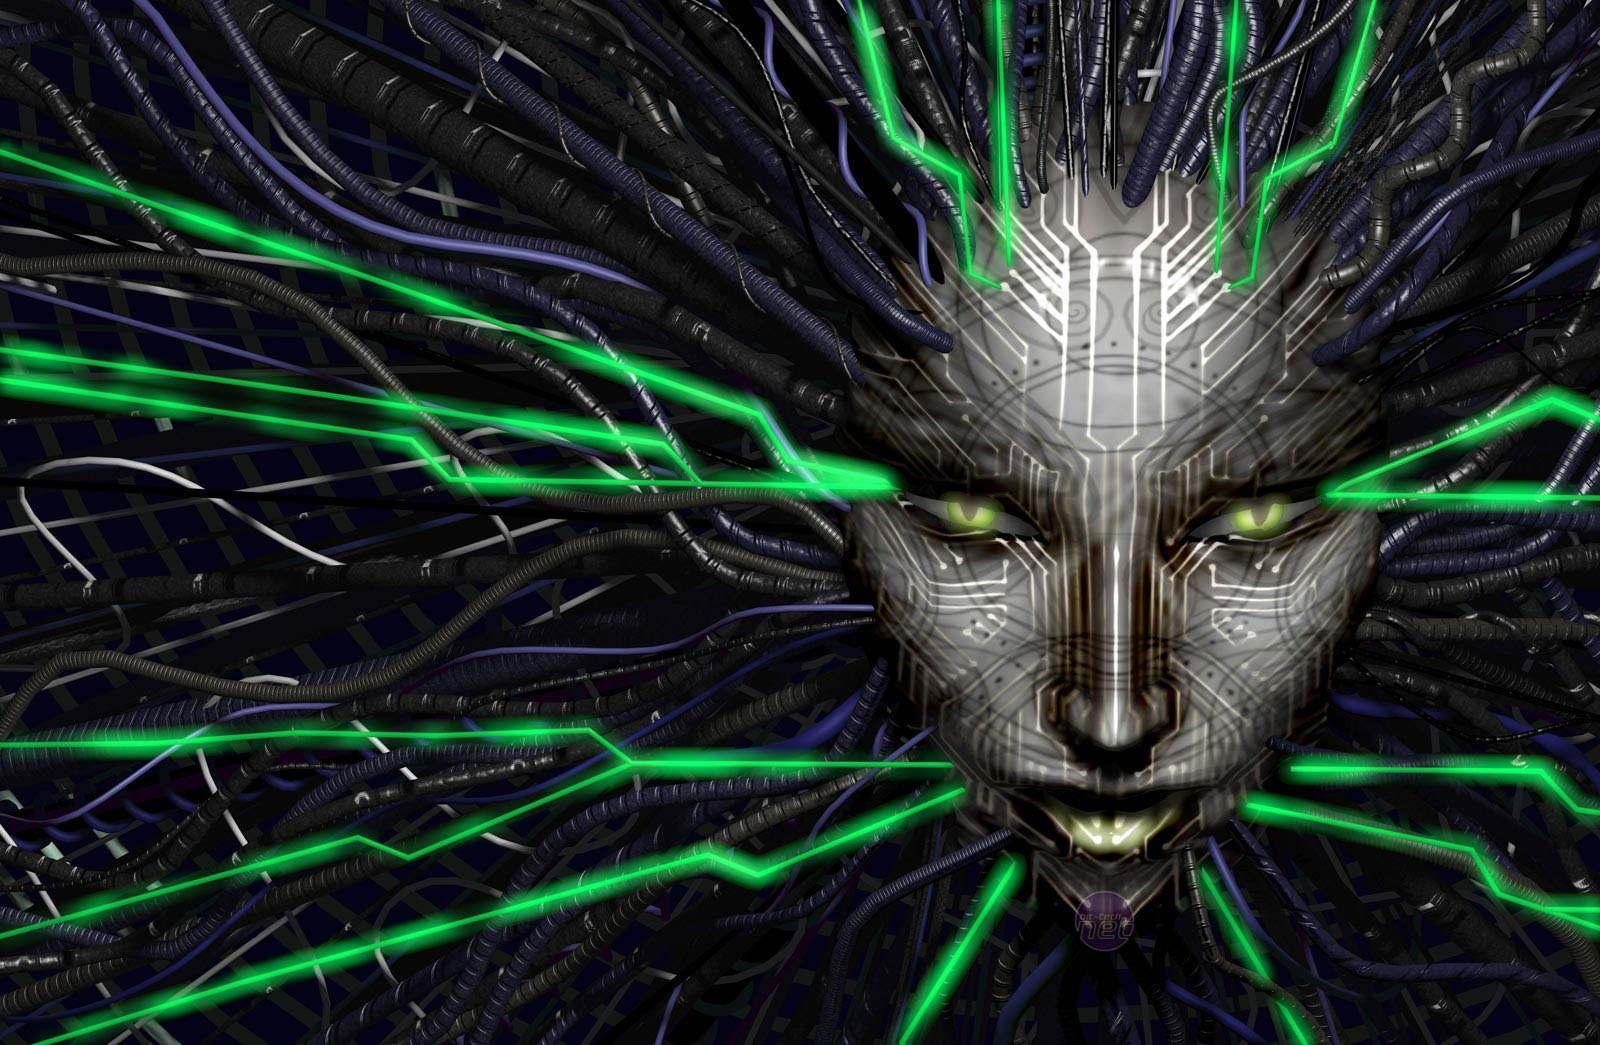 system shock 2020 release date